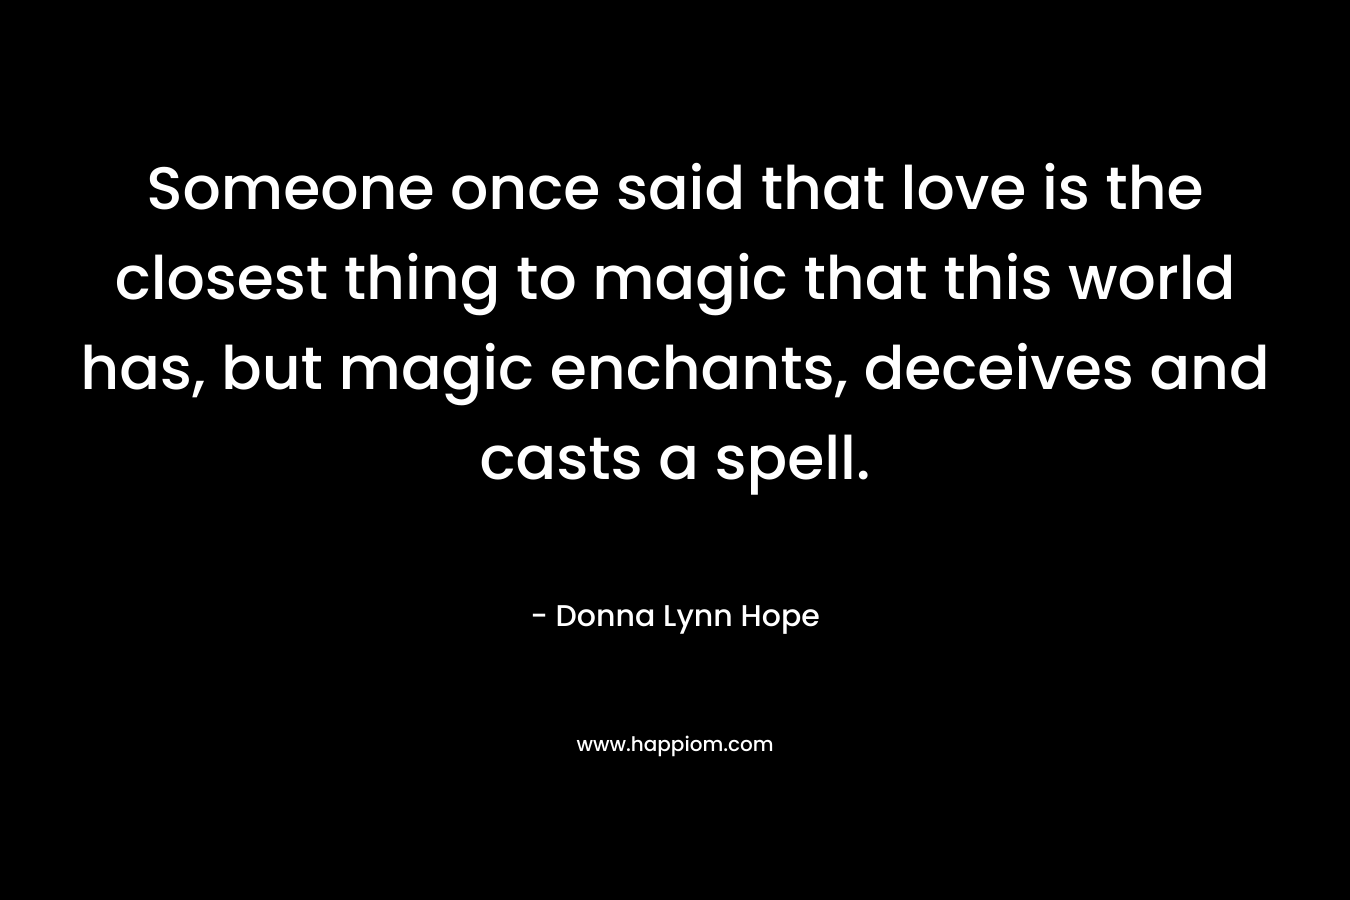 Someone once said that love is the closest thing to magic that this world has, but magic enchants, deceives and casts a spell.